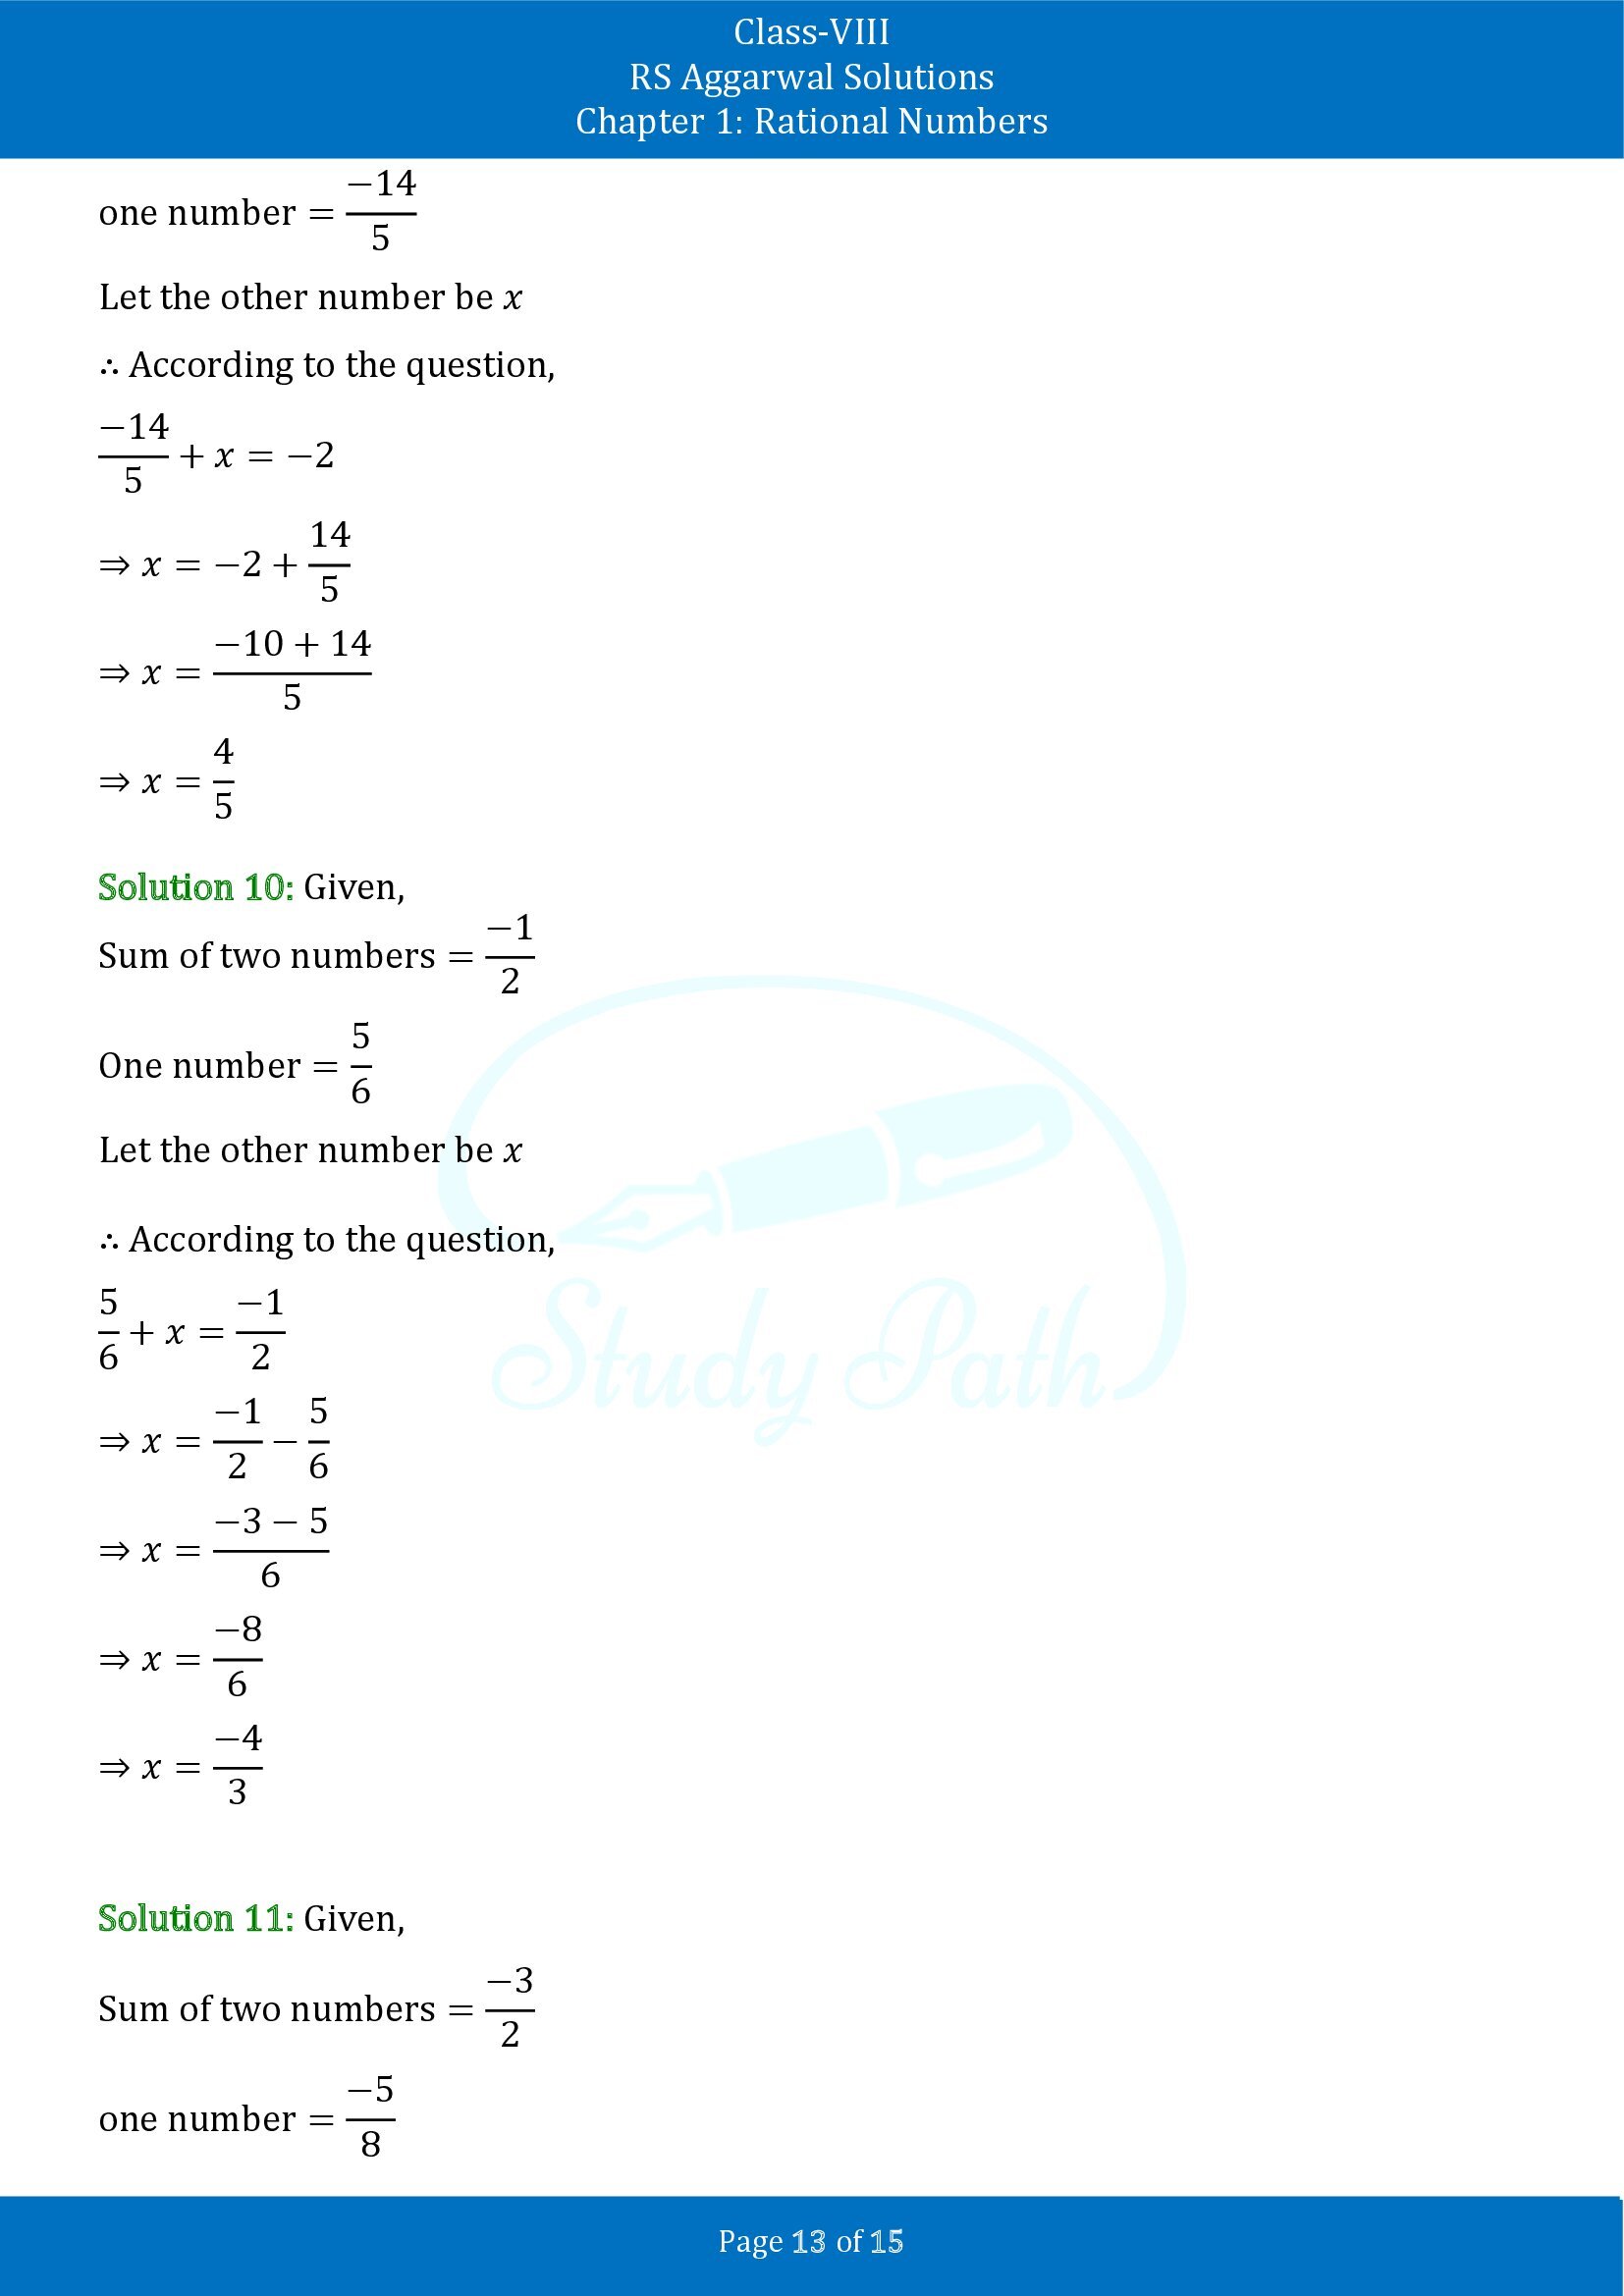 RS Aggarwal Solutions Class 8 Chapter 1 Rational Numbers Exercise 1C 00013